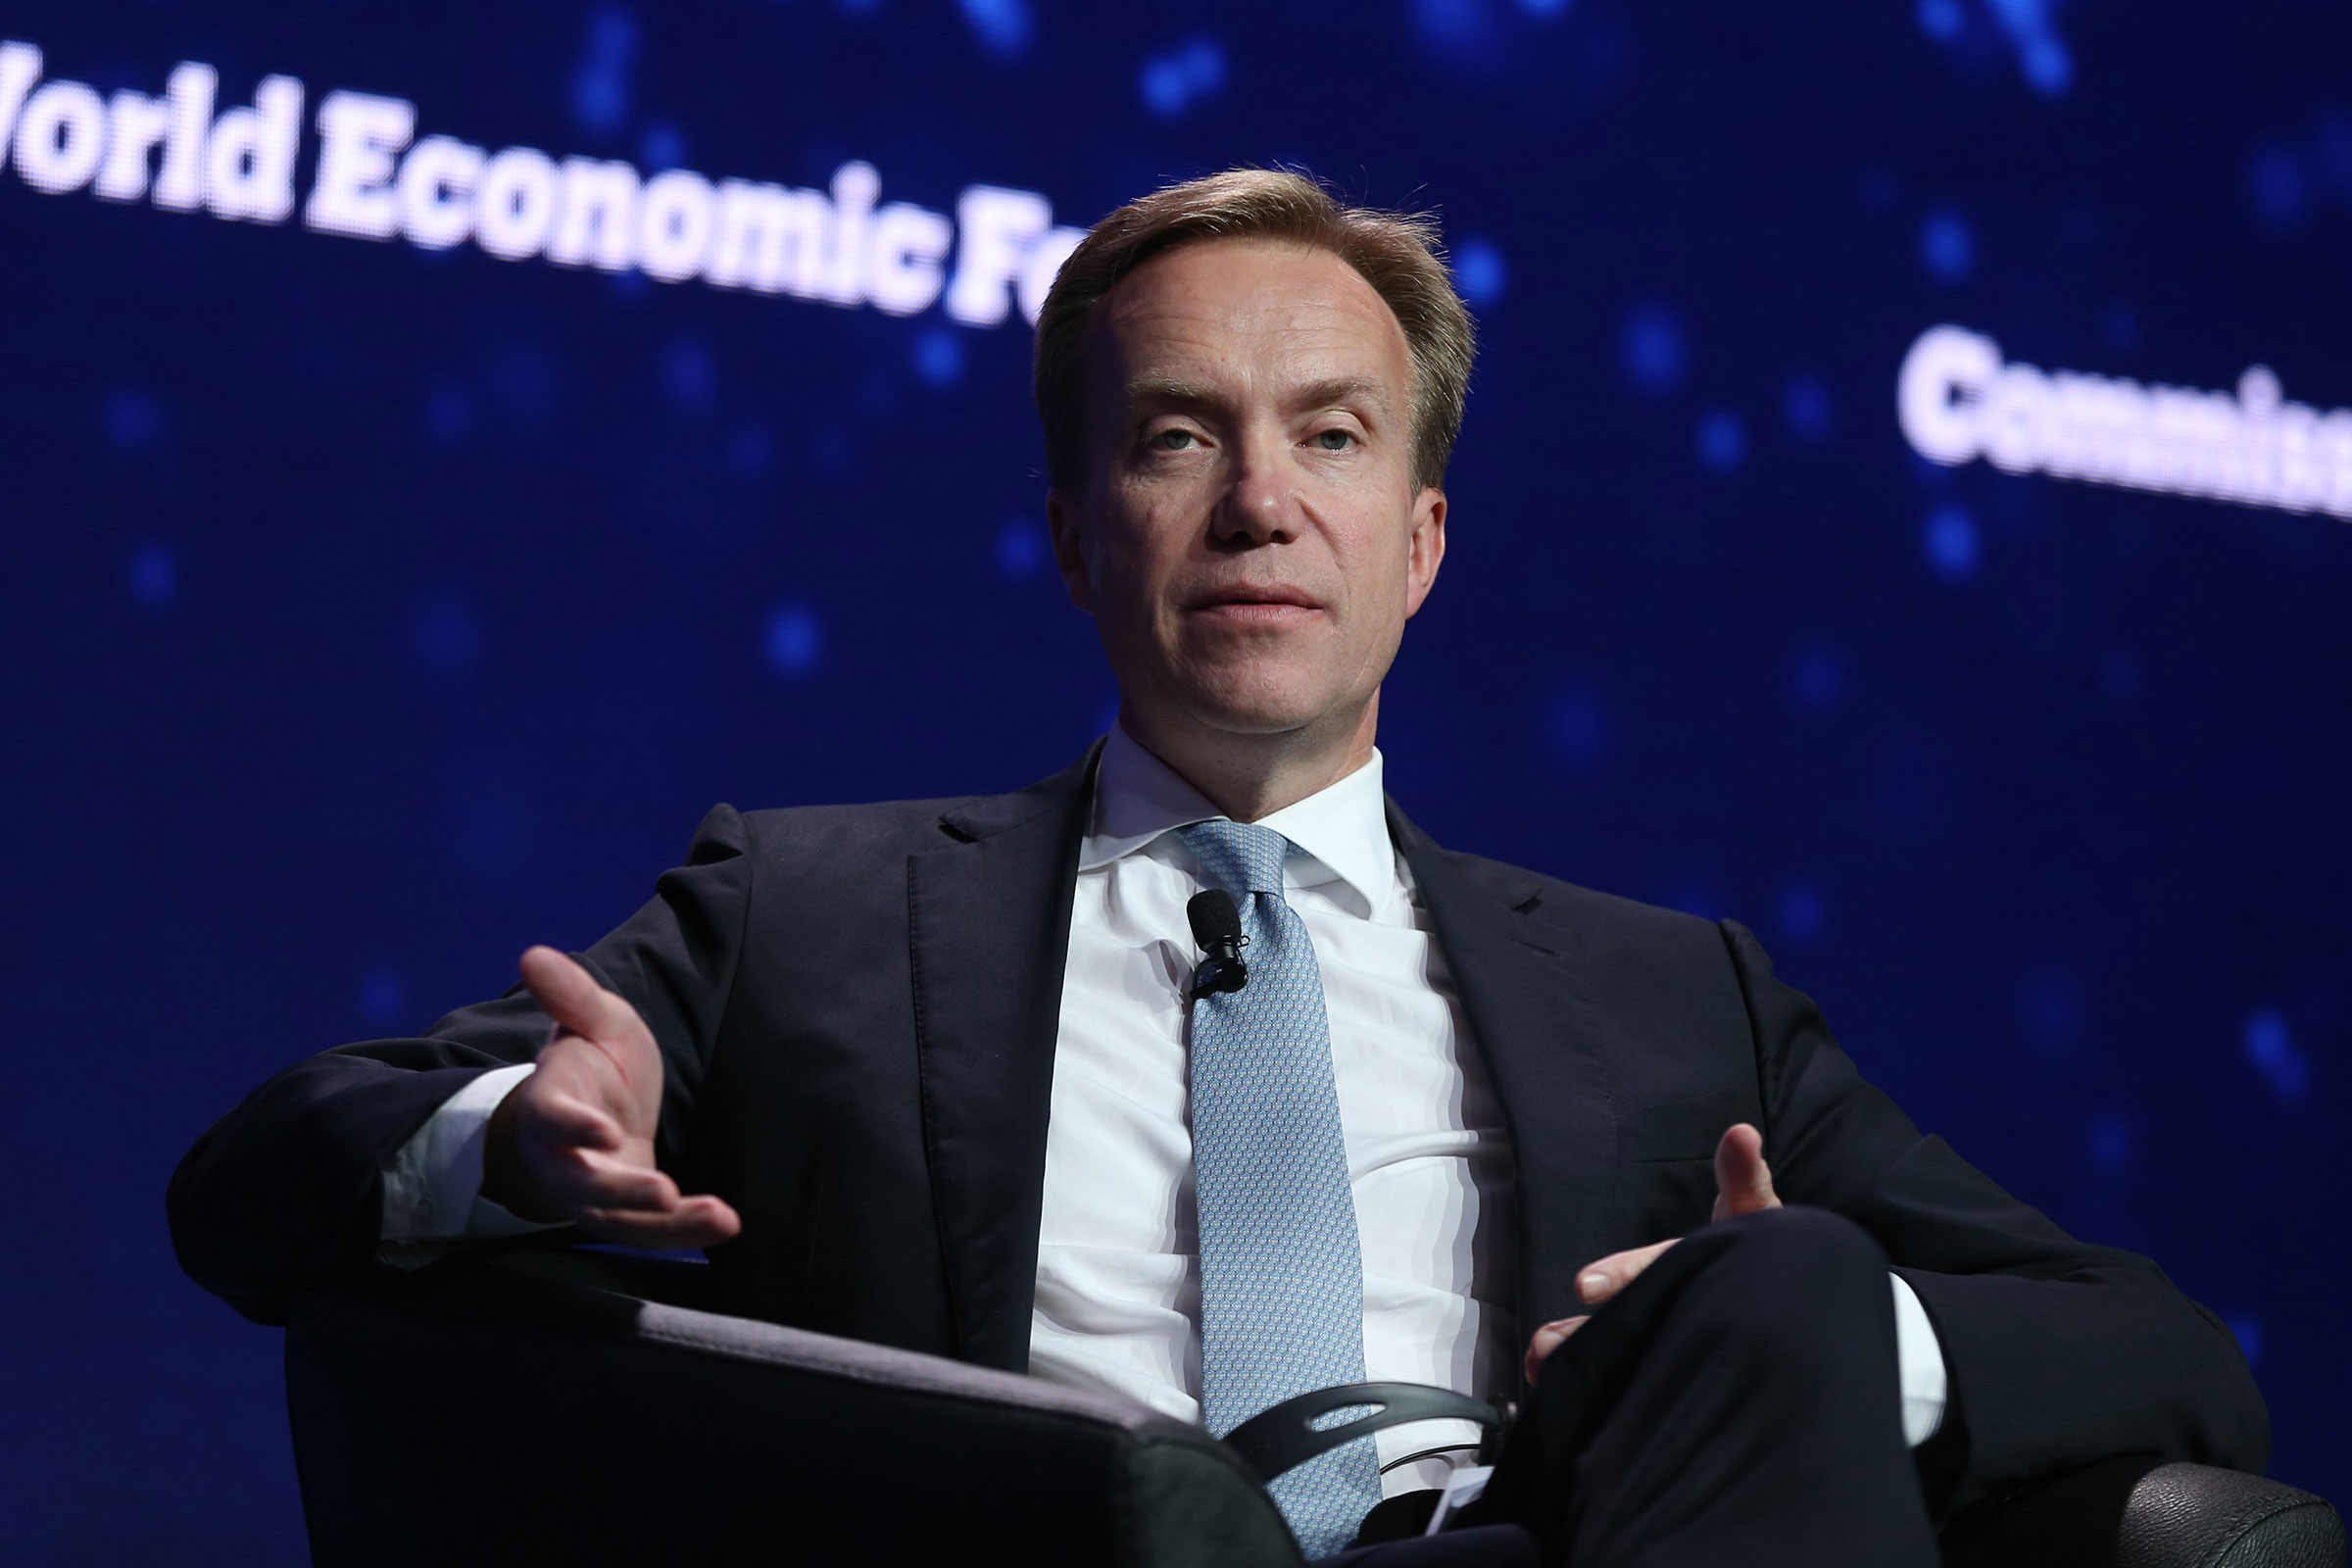 Borge Brende, the president of the World Economic Forum attends a panel at TRT World Forum in Istanbul, on Oct. 4, 2018. (Arif Hudaverdi Yaman—Anadolu Agency/Getty Images)